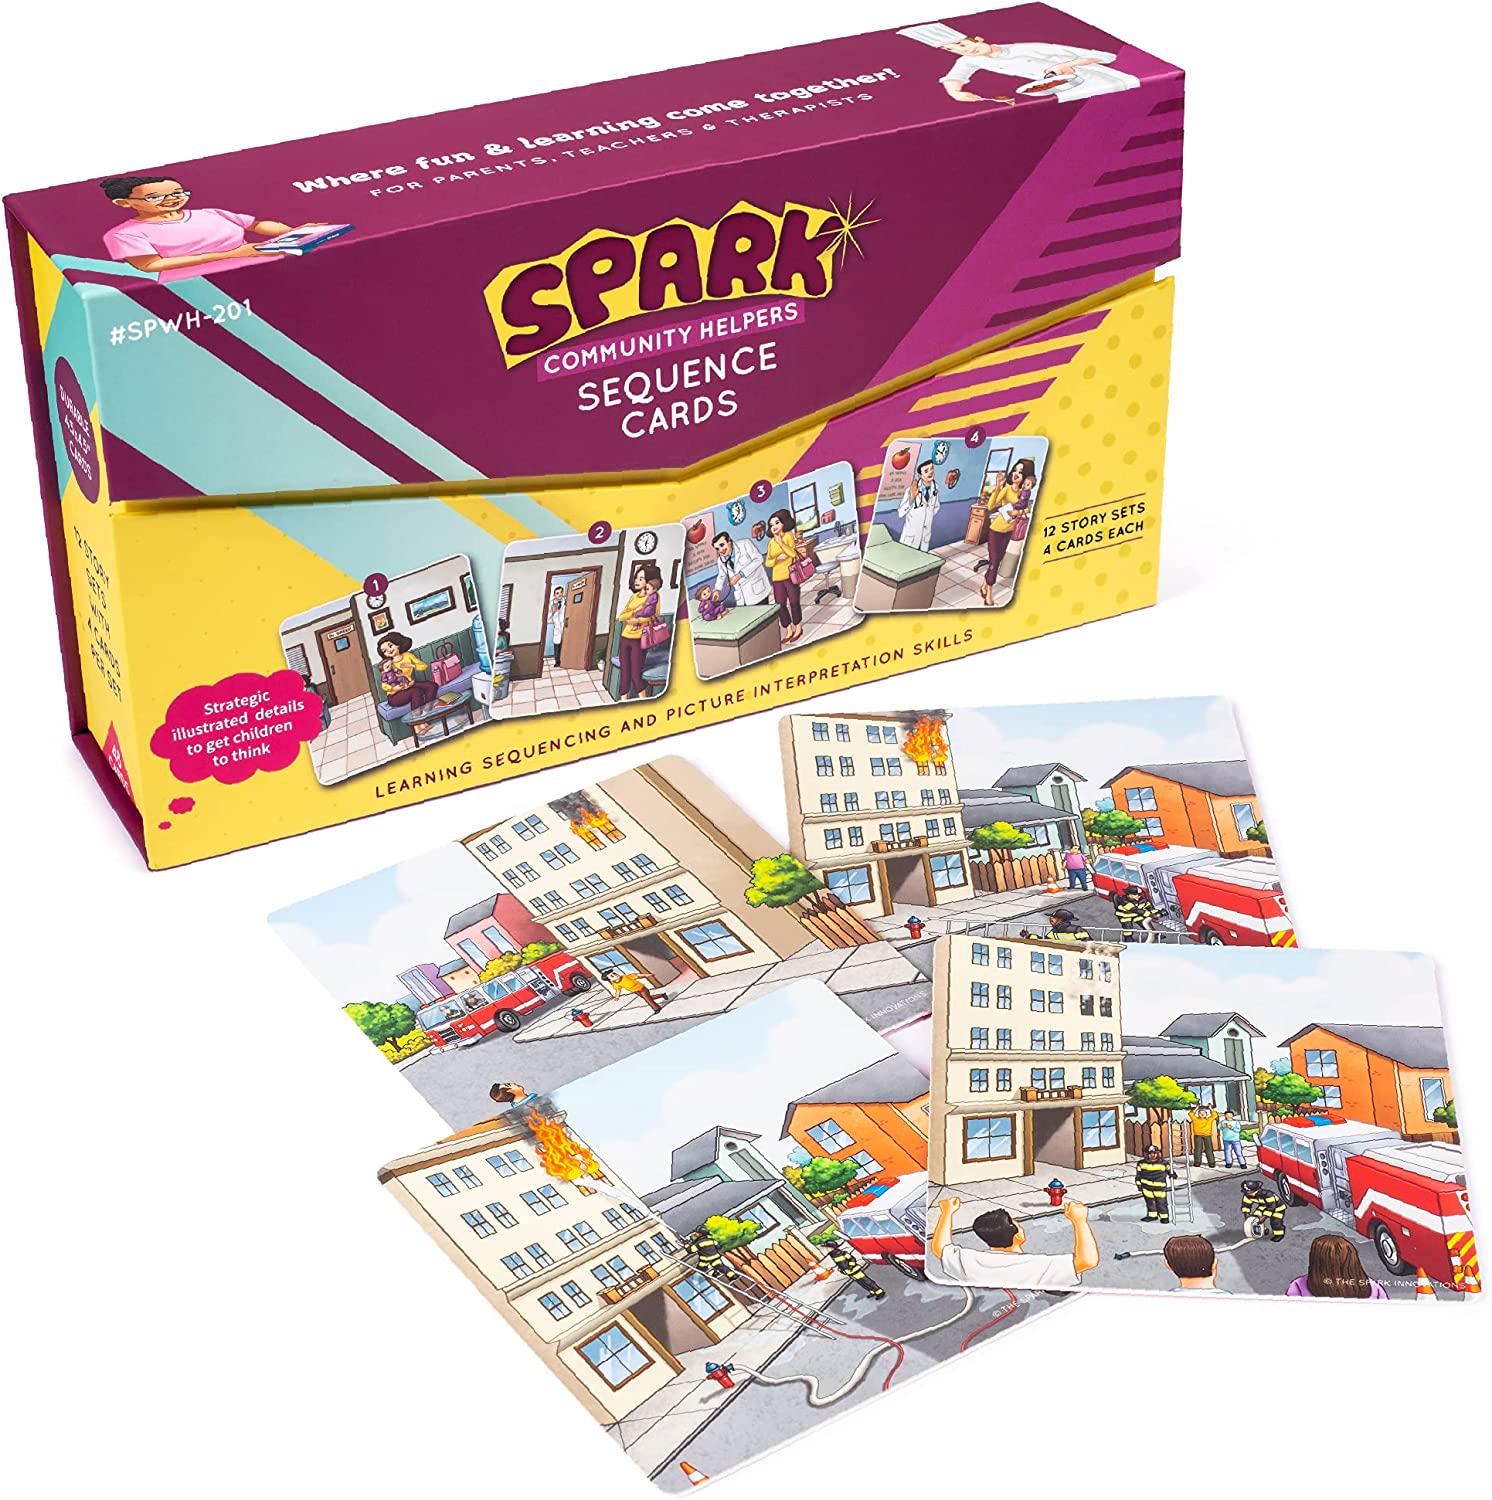 SPARK INNOVATIONS, Kids Story Cards Sequence Game - Set of 48 Large Storytelling and Sequencing Cards. Community Helper 12 Stories for Sentence Building and Language Development - Educational Picture Card Games, Ages 4+